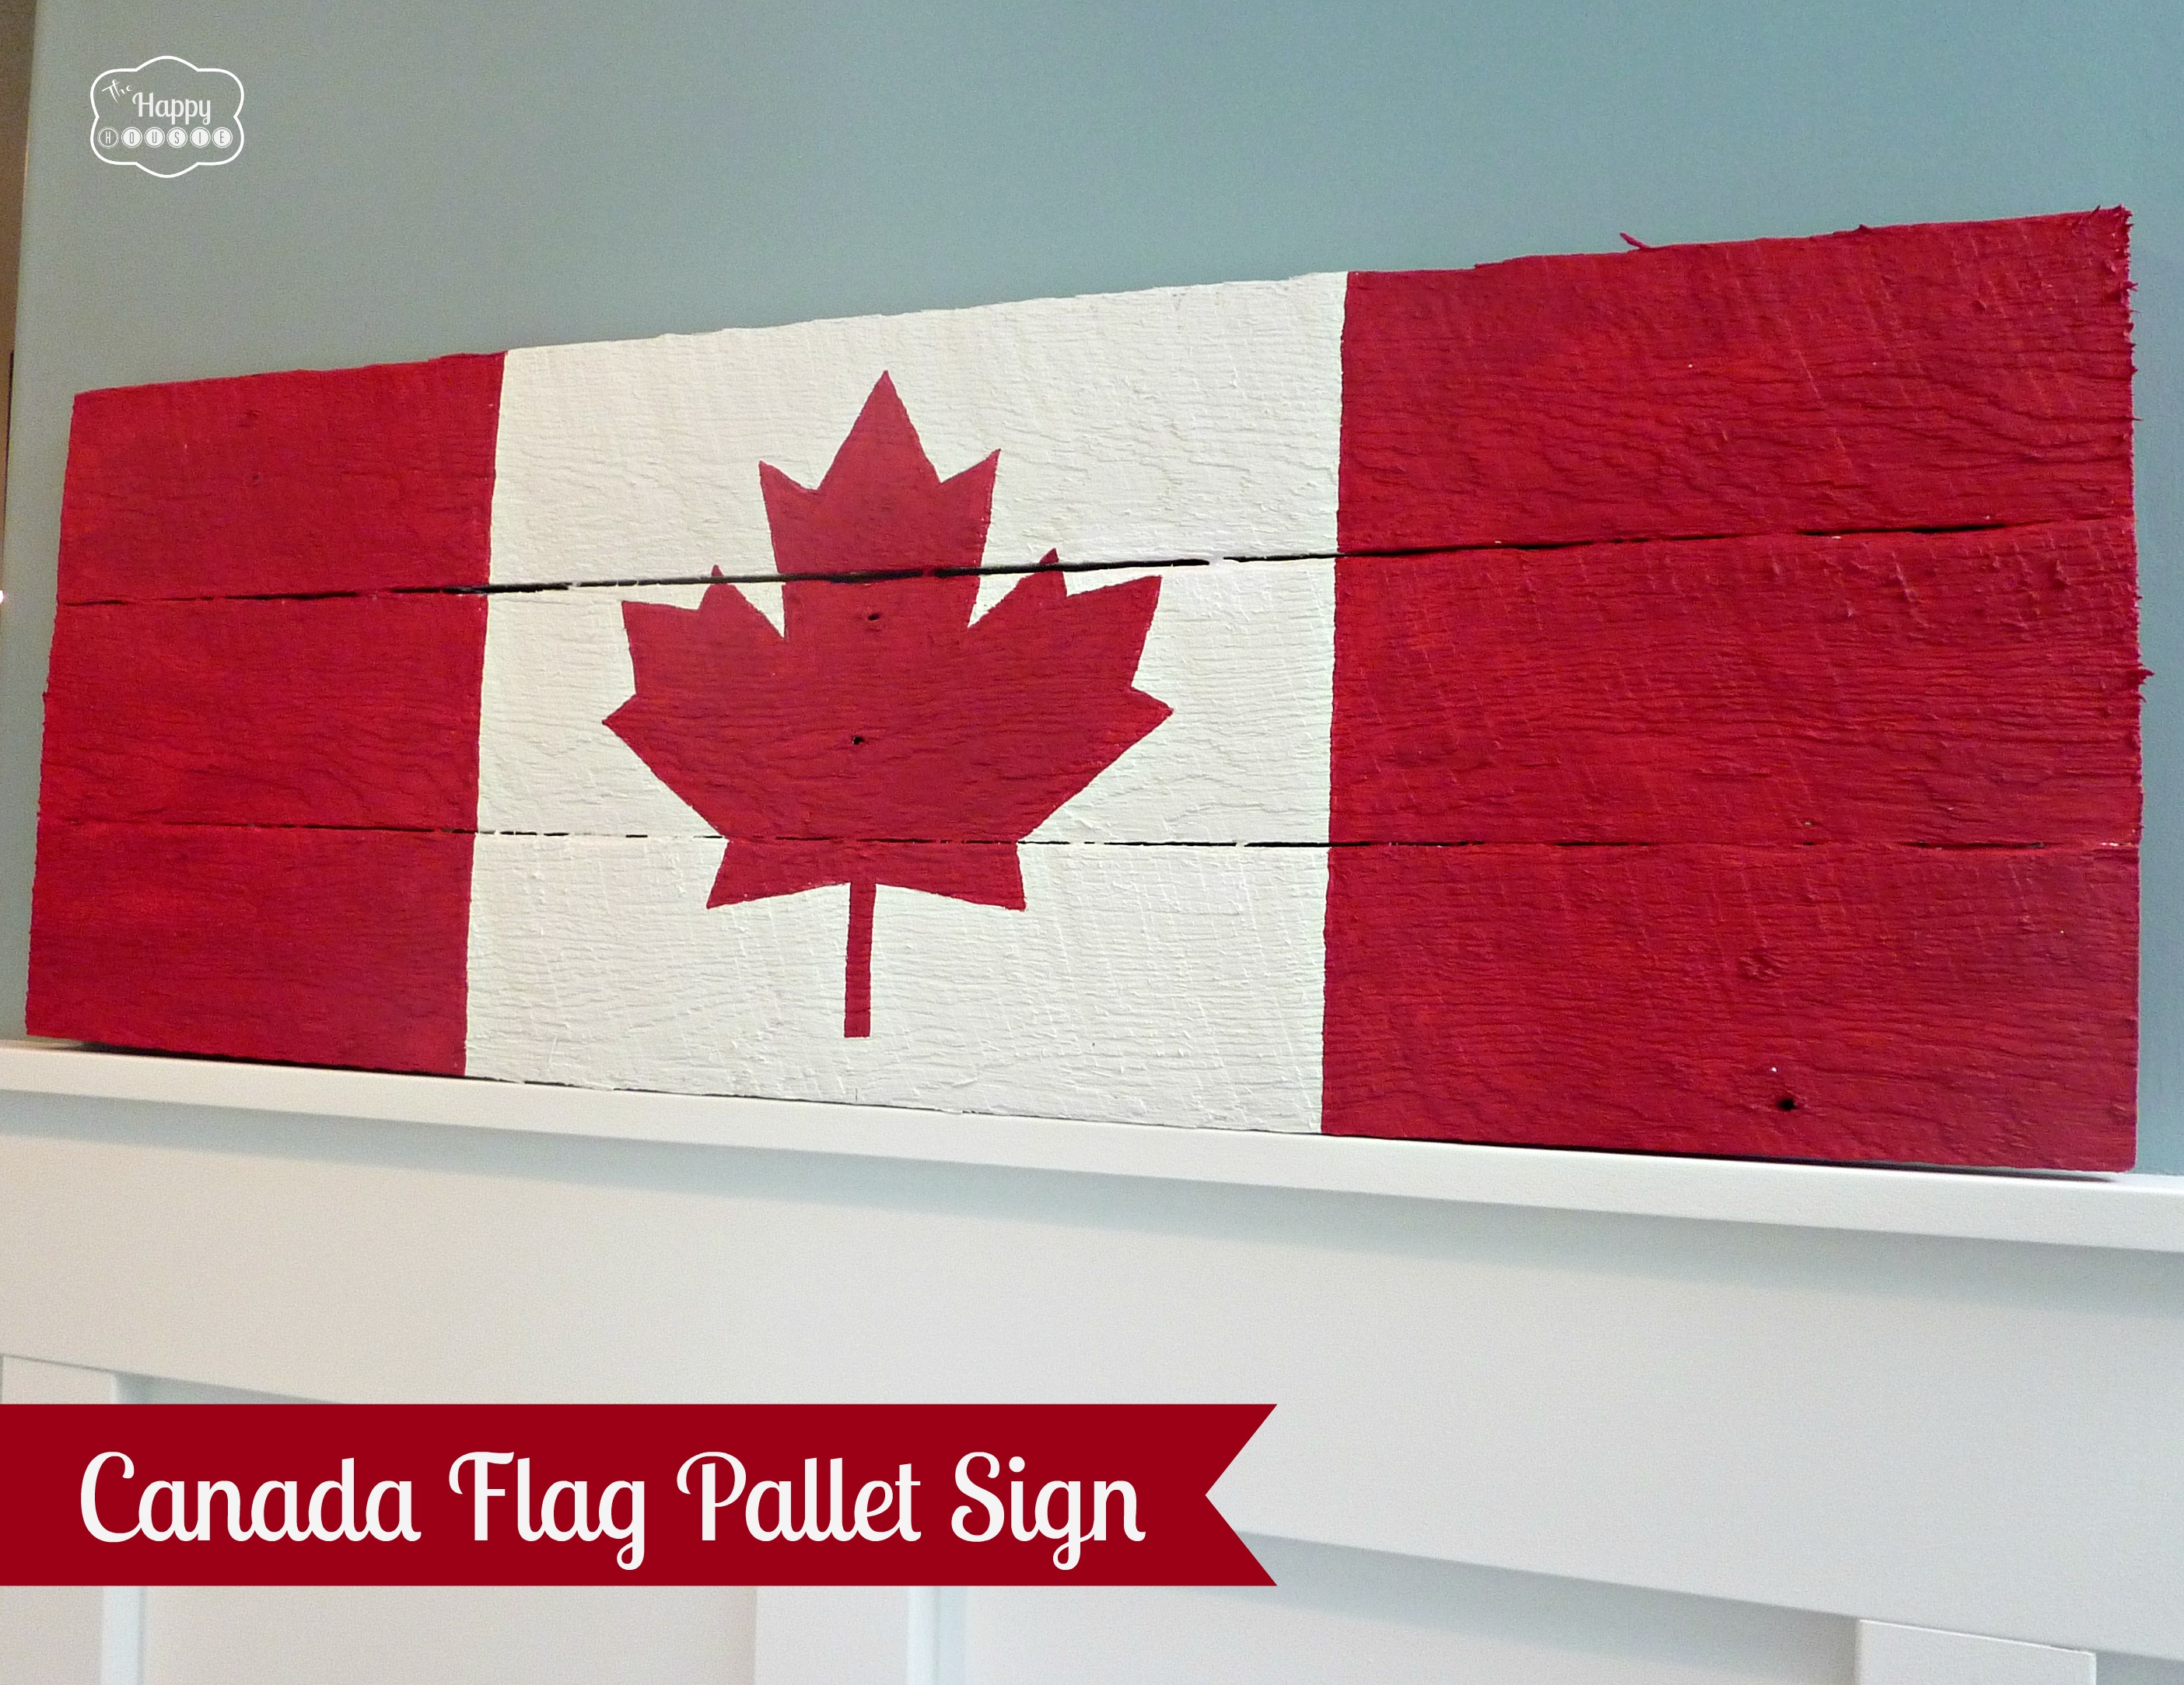 Happy Canada Day eh!! Canada Flag Pallet Sign